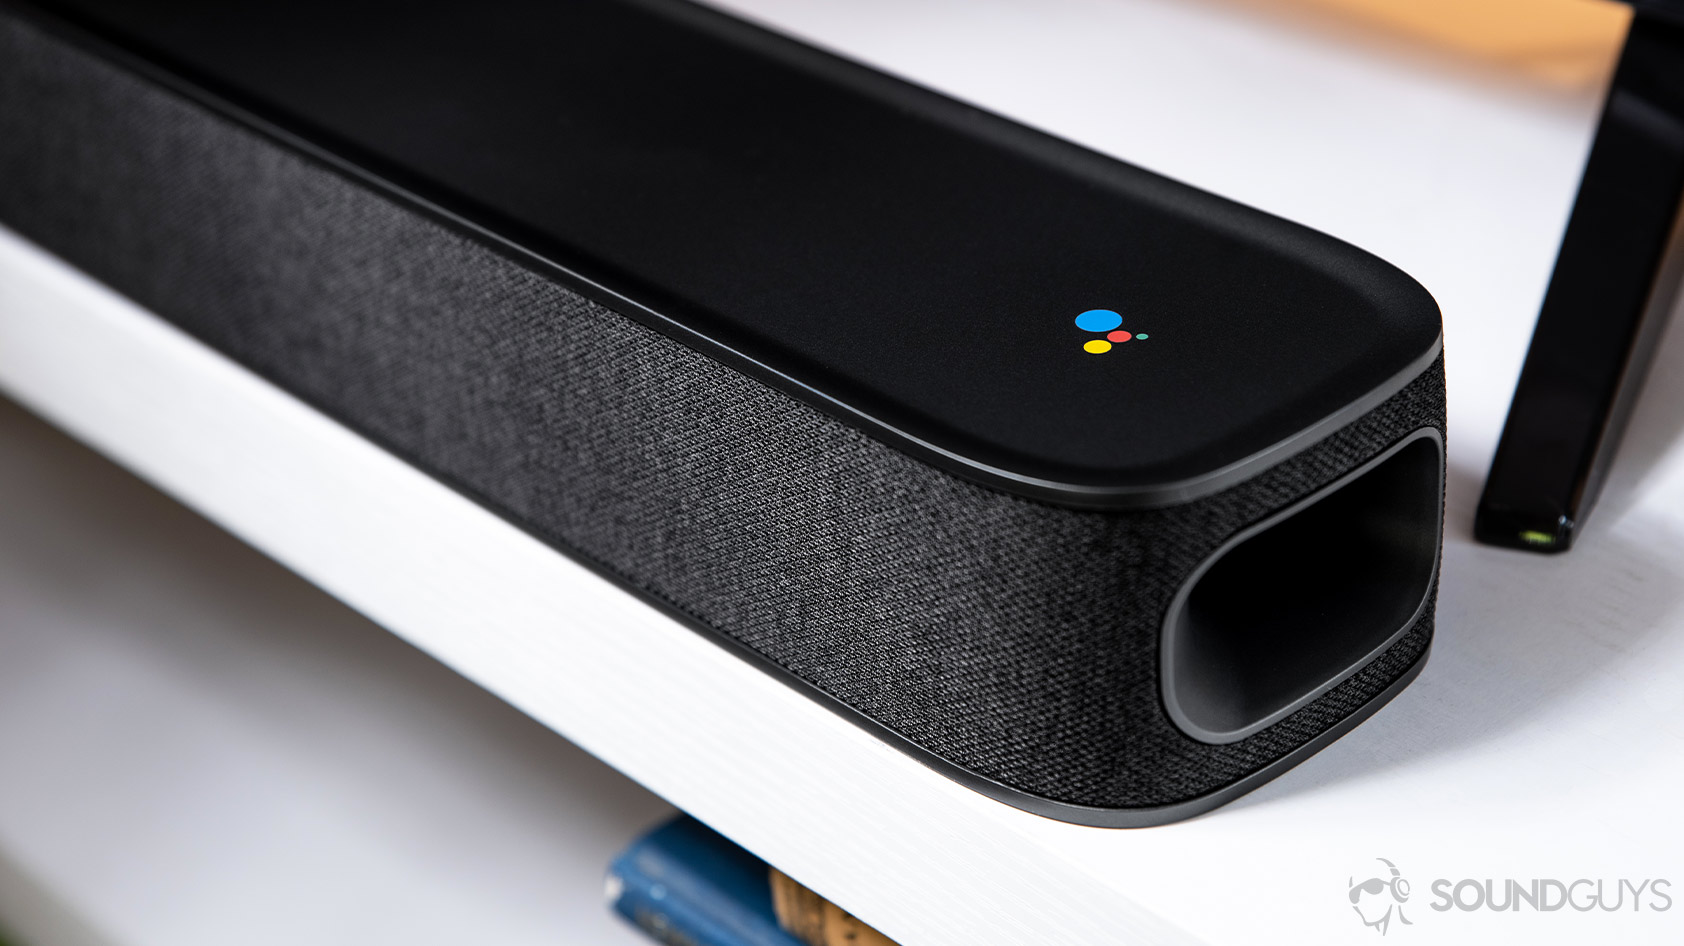 An image of the JBL Link Bar, one of the best sound bars, branded with the Google Assistant logo.